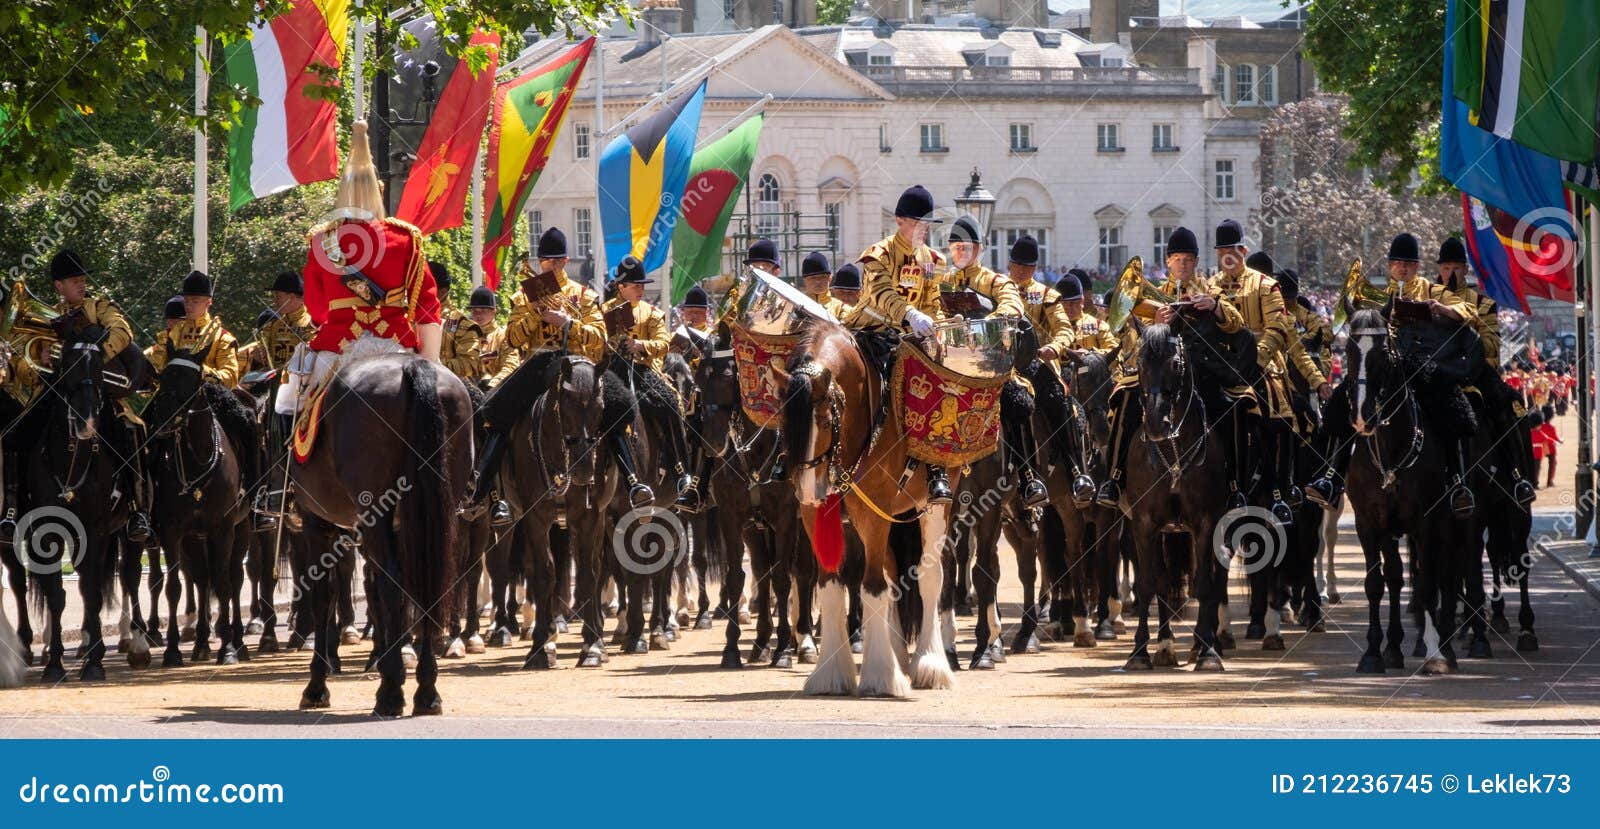 drum horse at the trooping the colour, annual military parade in london, uk.